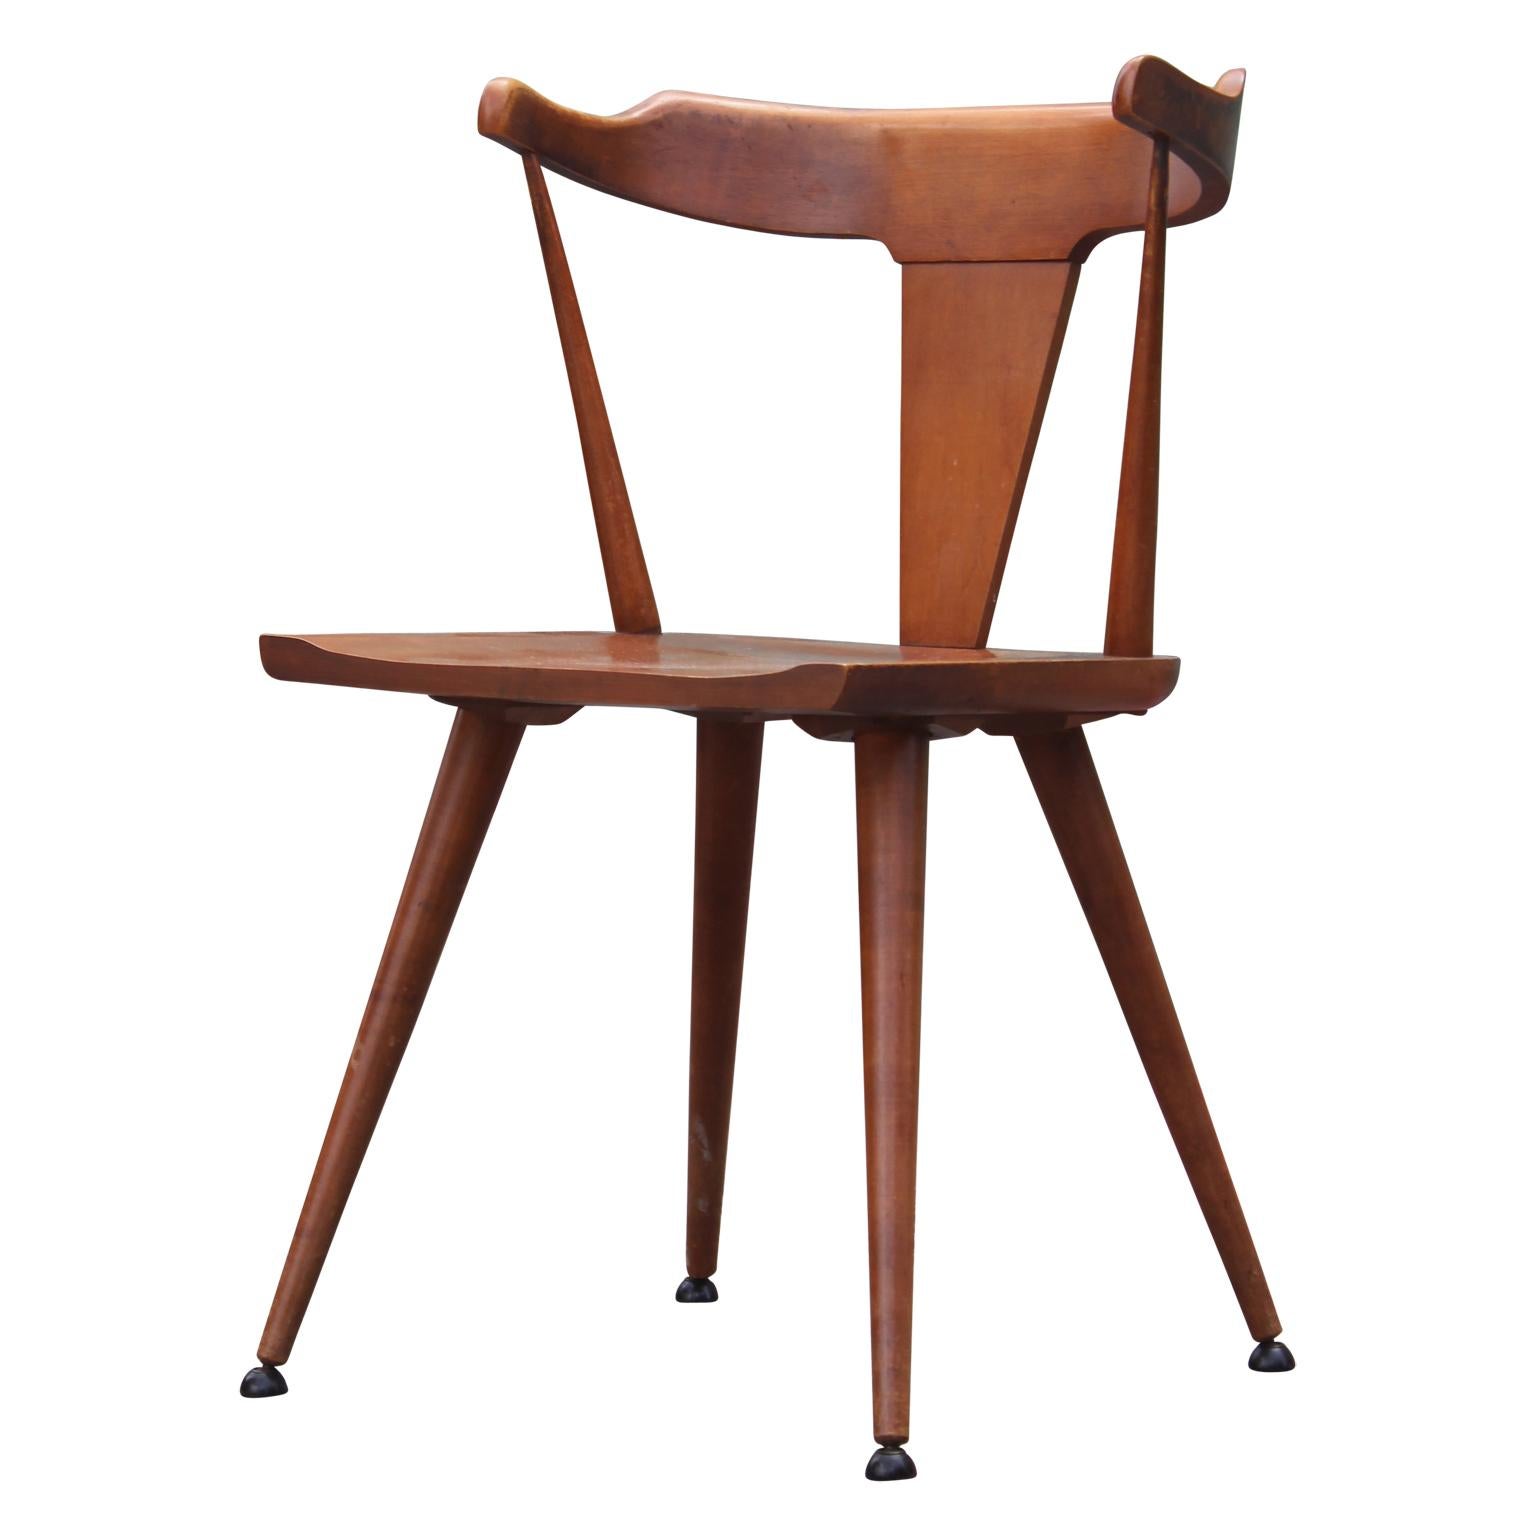 Modern set of four maple spindleback dining chairs by Paul McCobb and manufactured by Winchendon. Model #1530.